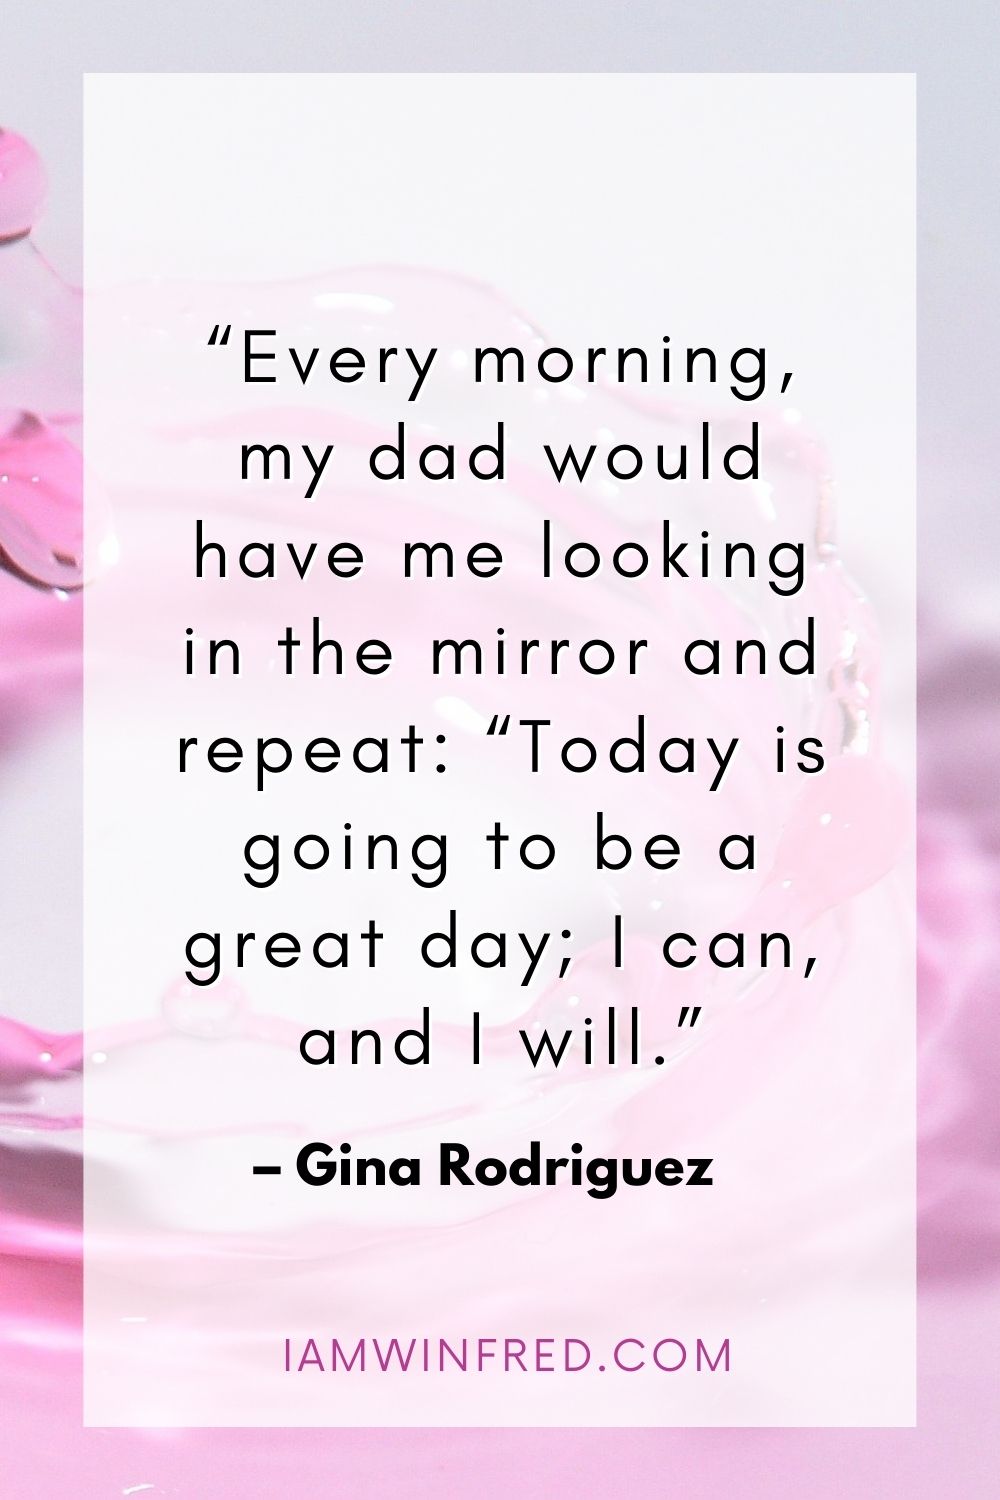 Every Morning My Dad Would Have Me Looking In The Mirror And Repeat Today Is Going To Be A Great Day I Can And I Will.